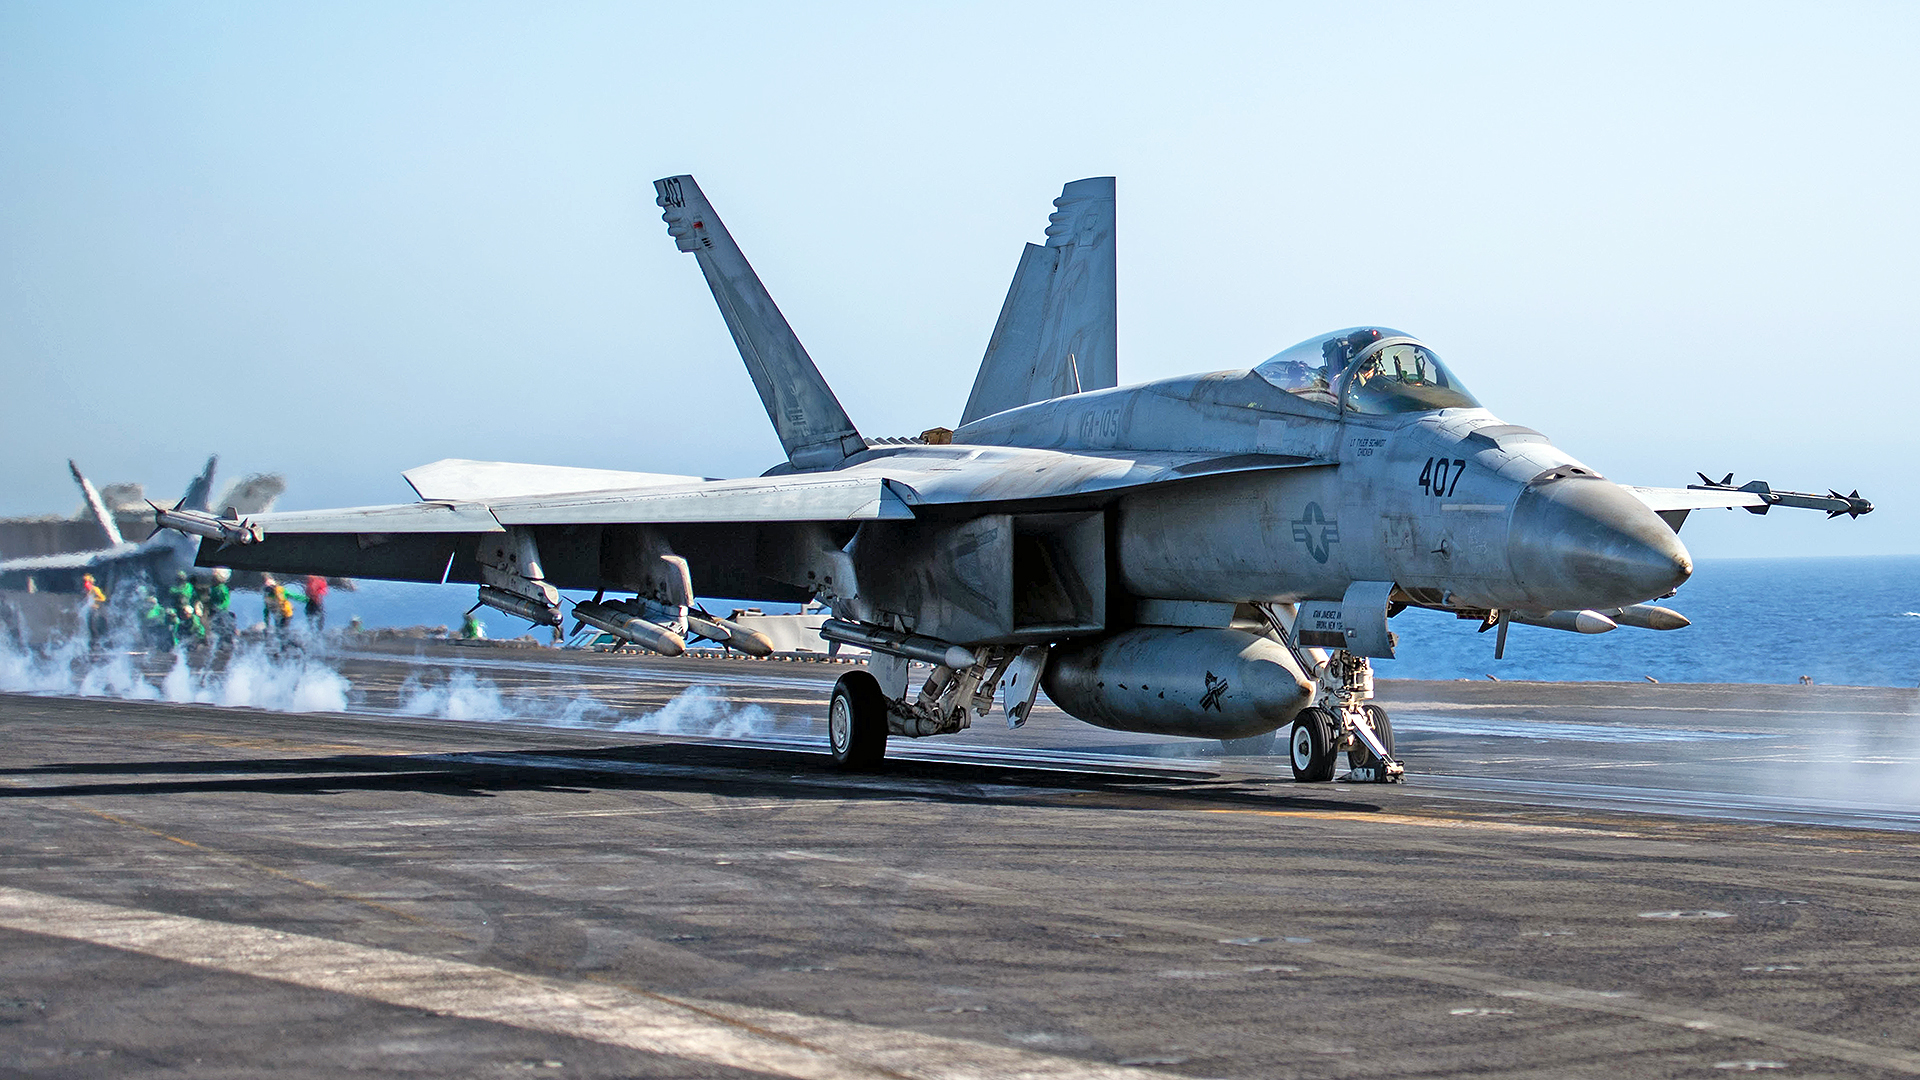 240420-N-HE057-1374 RED SEA (April 20, 2024)  An F/A-18E Super Hornet, attached to the "Gunslingers" of Strike Fighter Squadron (VFA) 105, launches off the flight deck during flight operations aboard the <em>Nimitz</em> class aircraft carrier USS <em>Dwight D. Eisenhower</em> (CVN 69) in the Red Sea, April 20. The Dwight D. Eisenhower Carrier Strike Group is deployed to the U.S. 5th Fleet area of operations to support maritime security and stability in the Middle East region. (Official U.S. Navy photo)